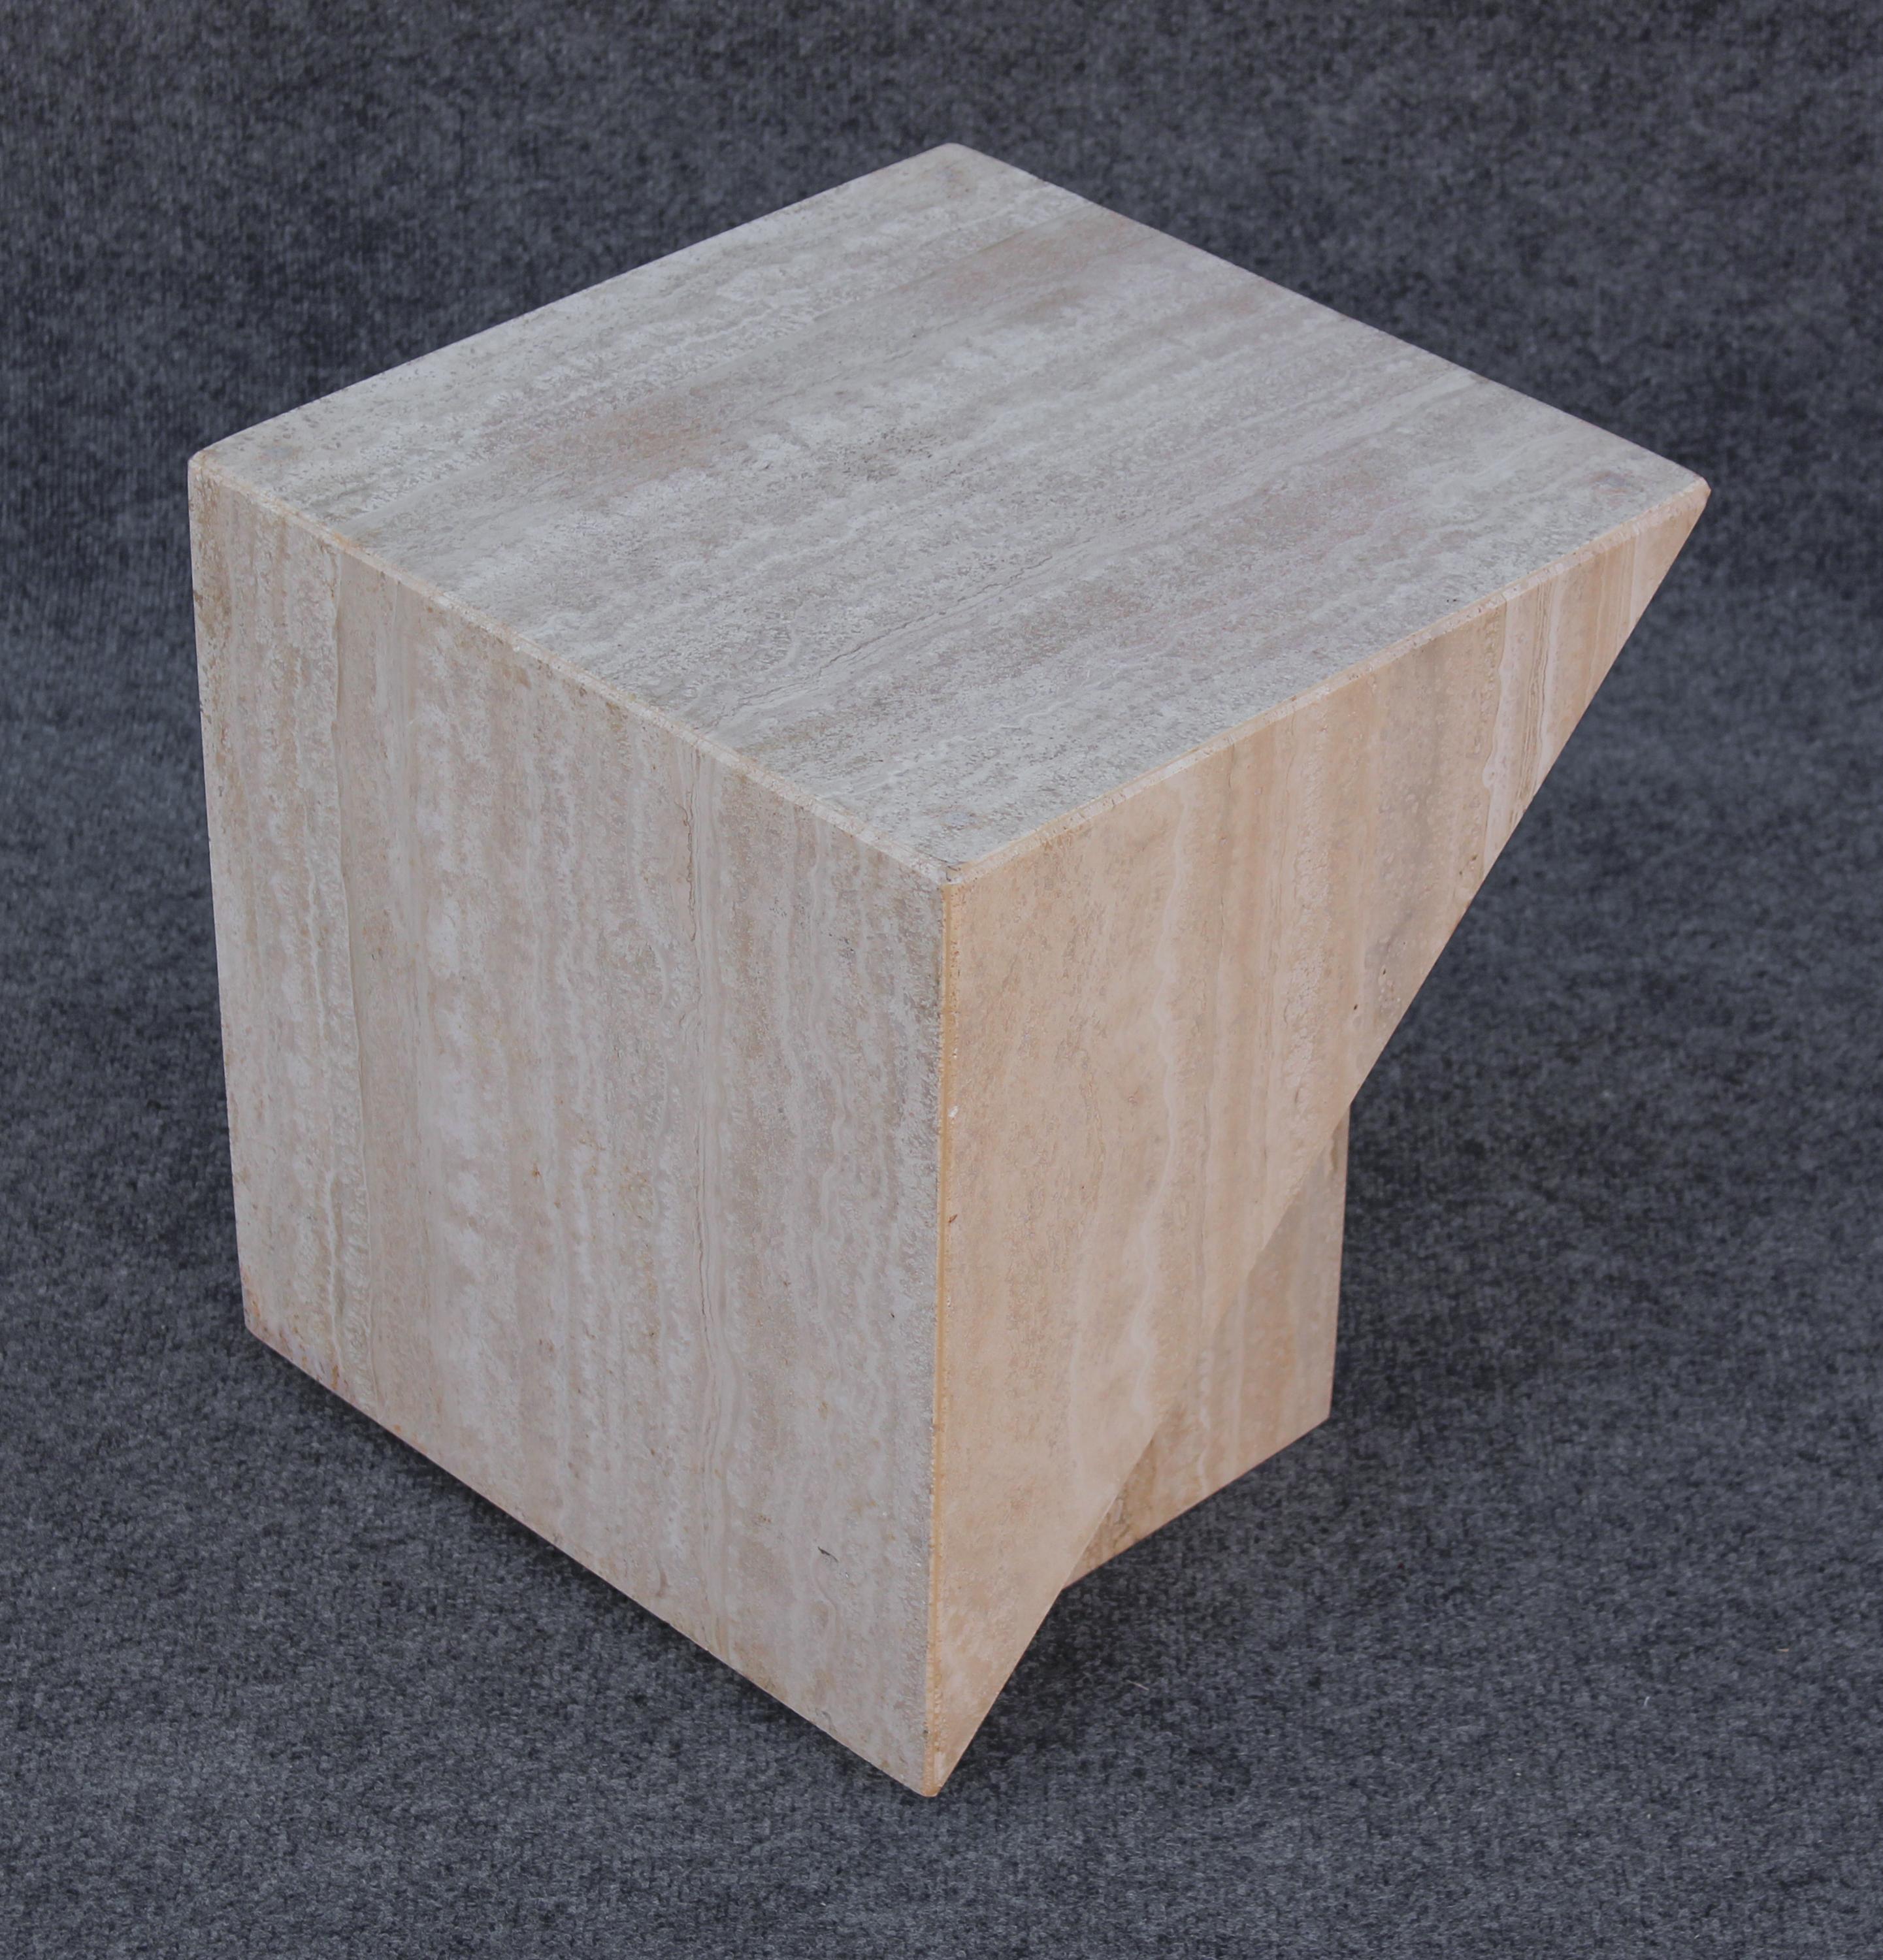 Midcentury Italian Post Modern Travertine Marble Cube Side Table or End Table For Sale 2